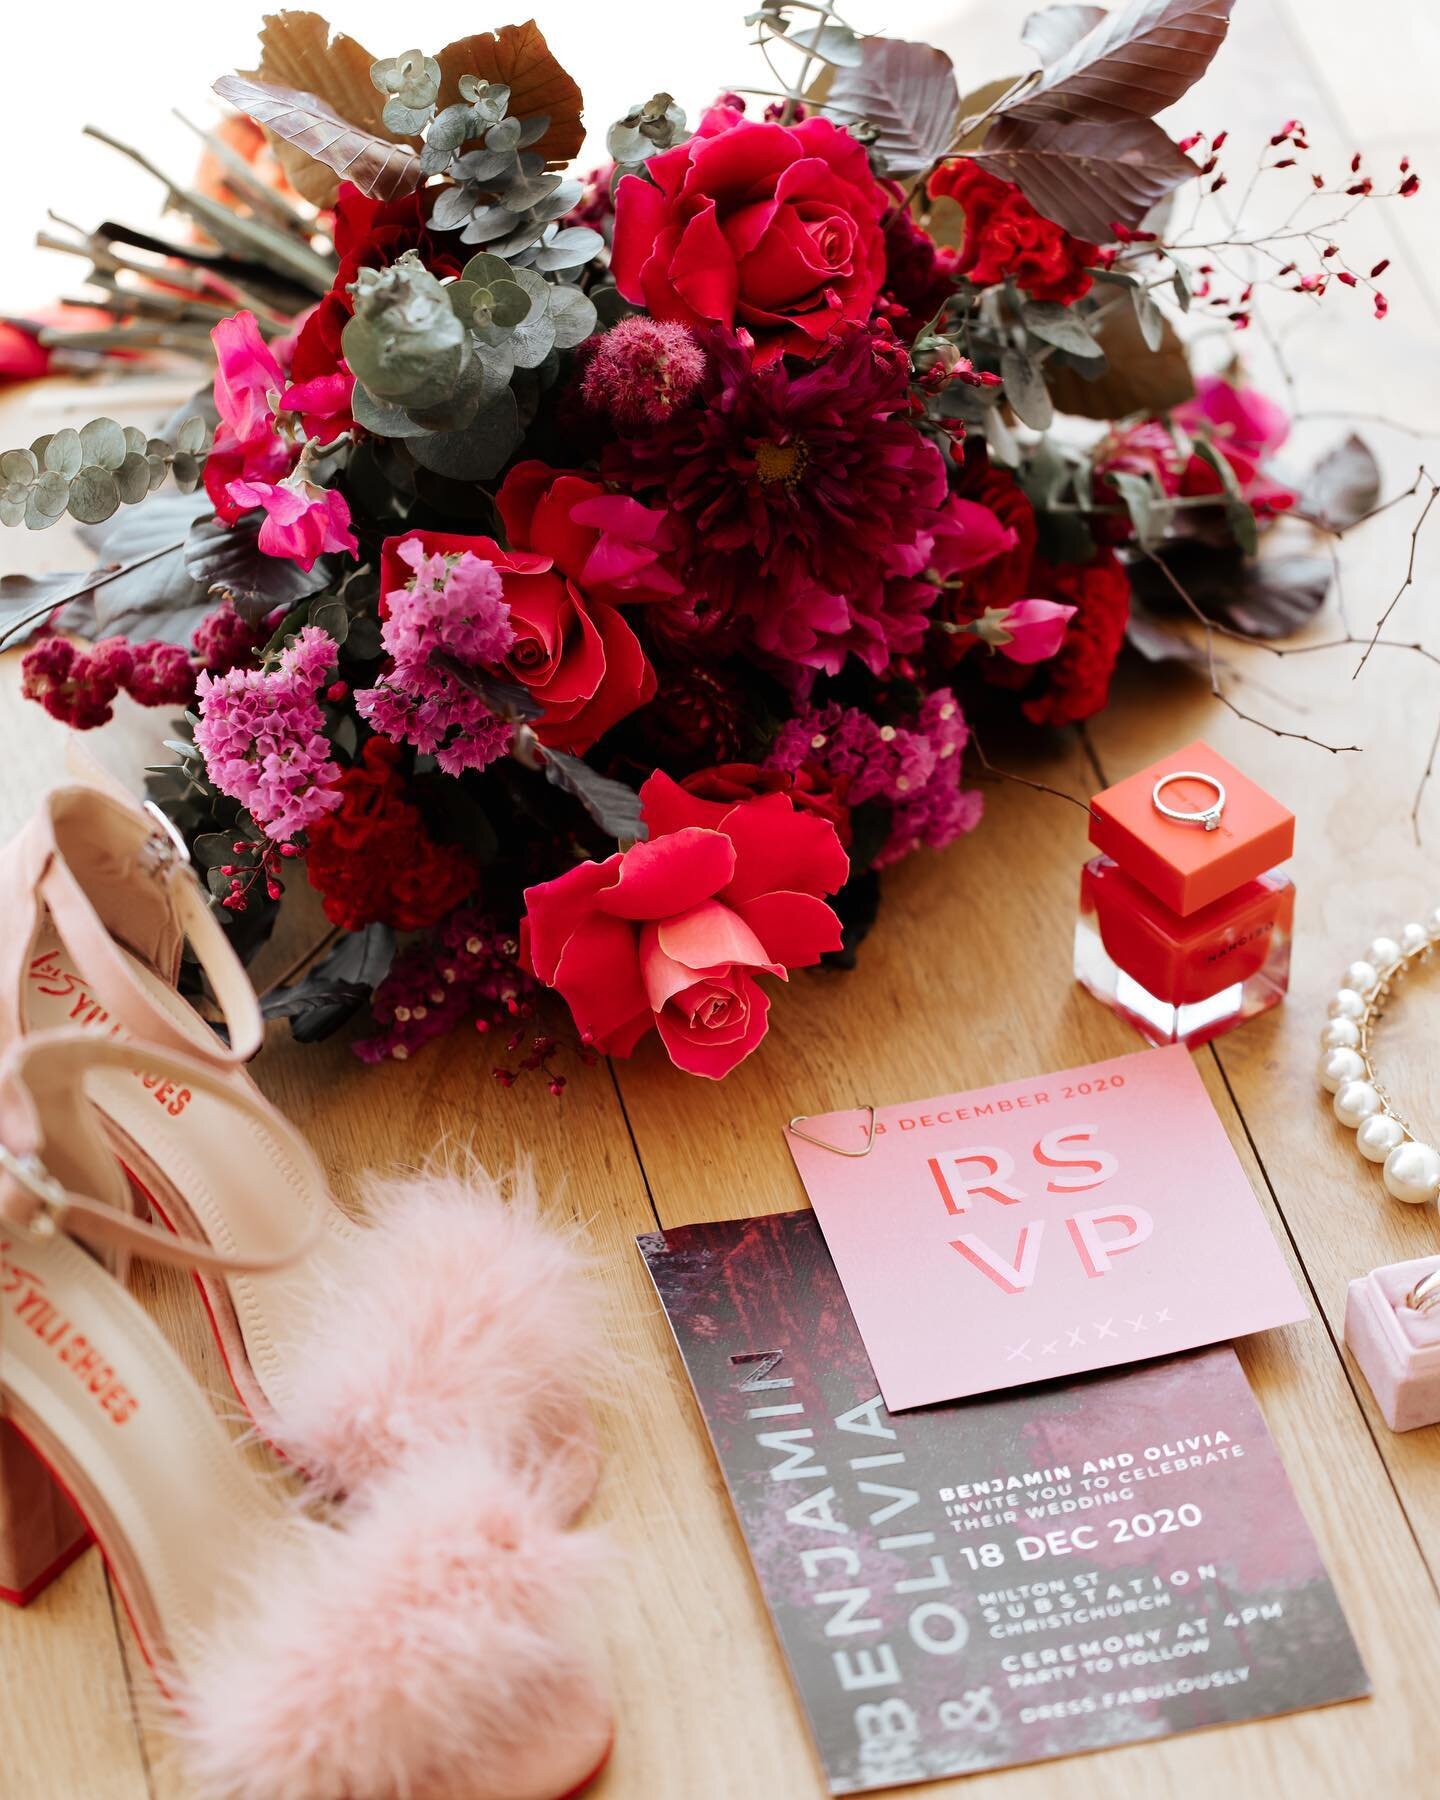 Bold colour for the bride with a little &lsquo;extra&rsquo; in her step - We can&rsquo;t get enough of the details from this edgy day styled by Christchurch-based @littlehirecomp 

📷 @susannahblatchford